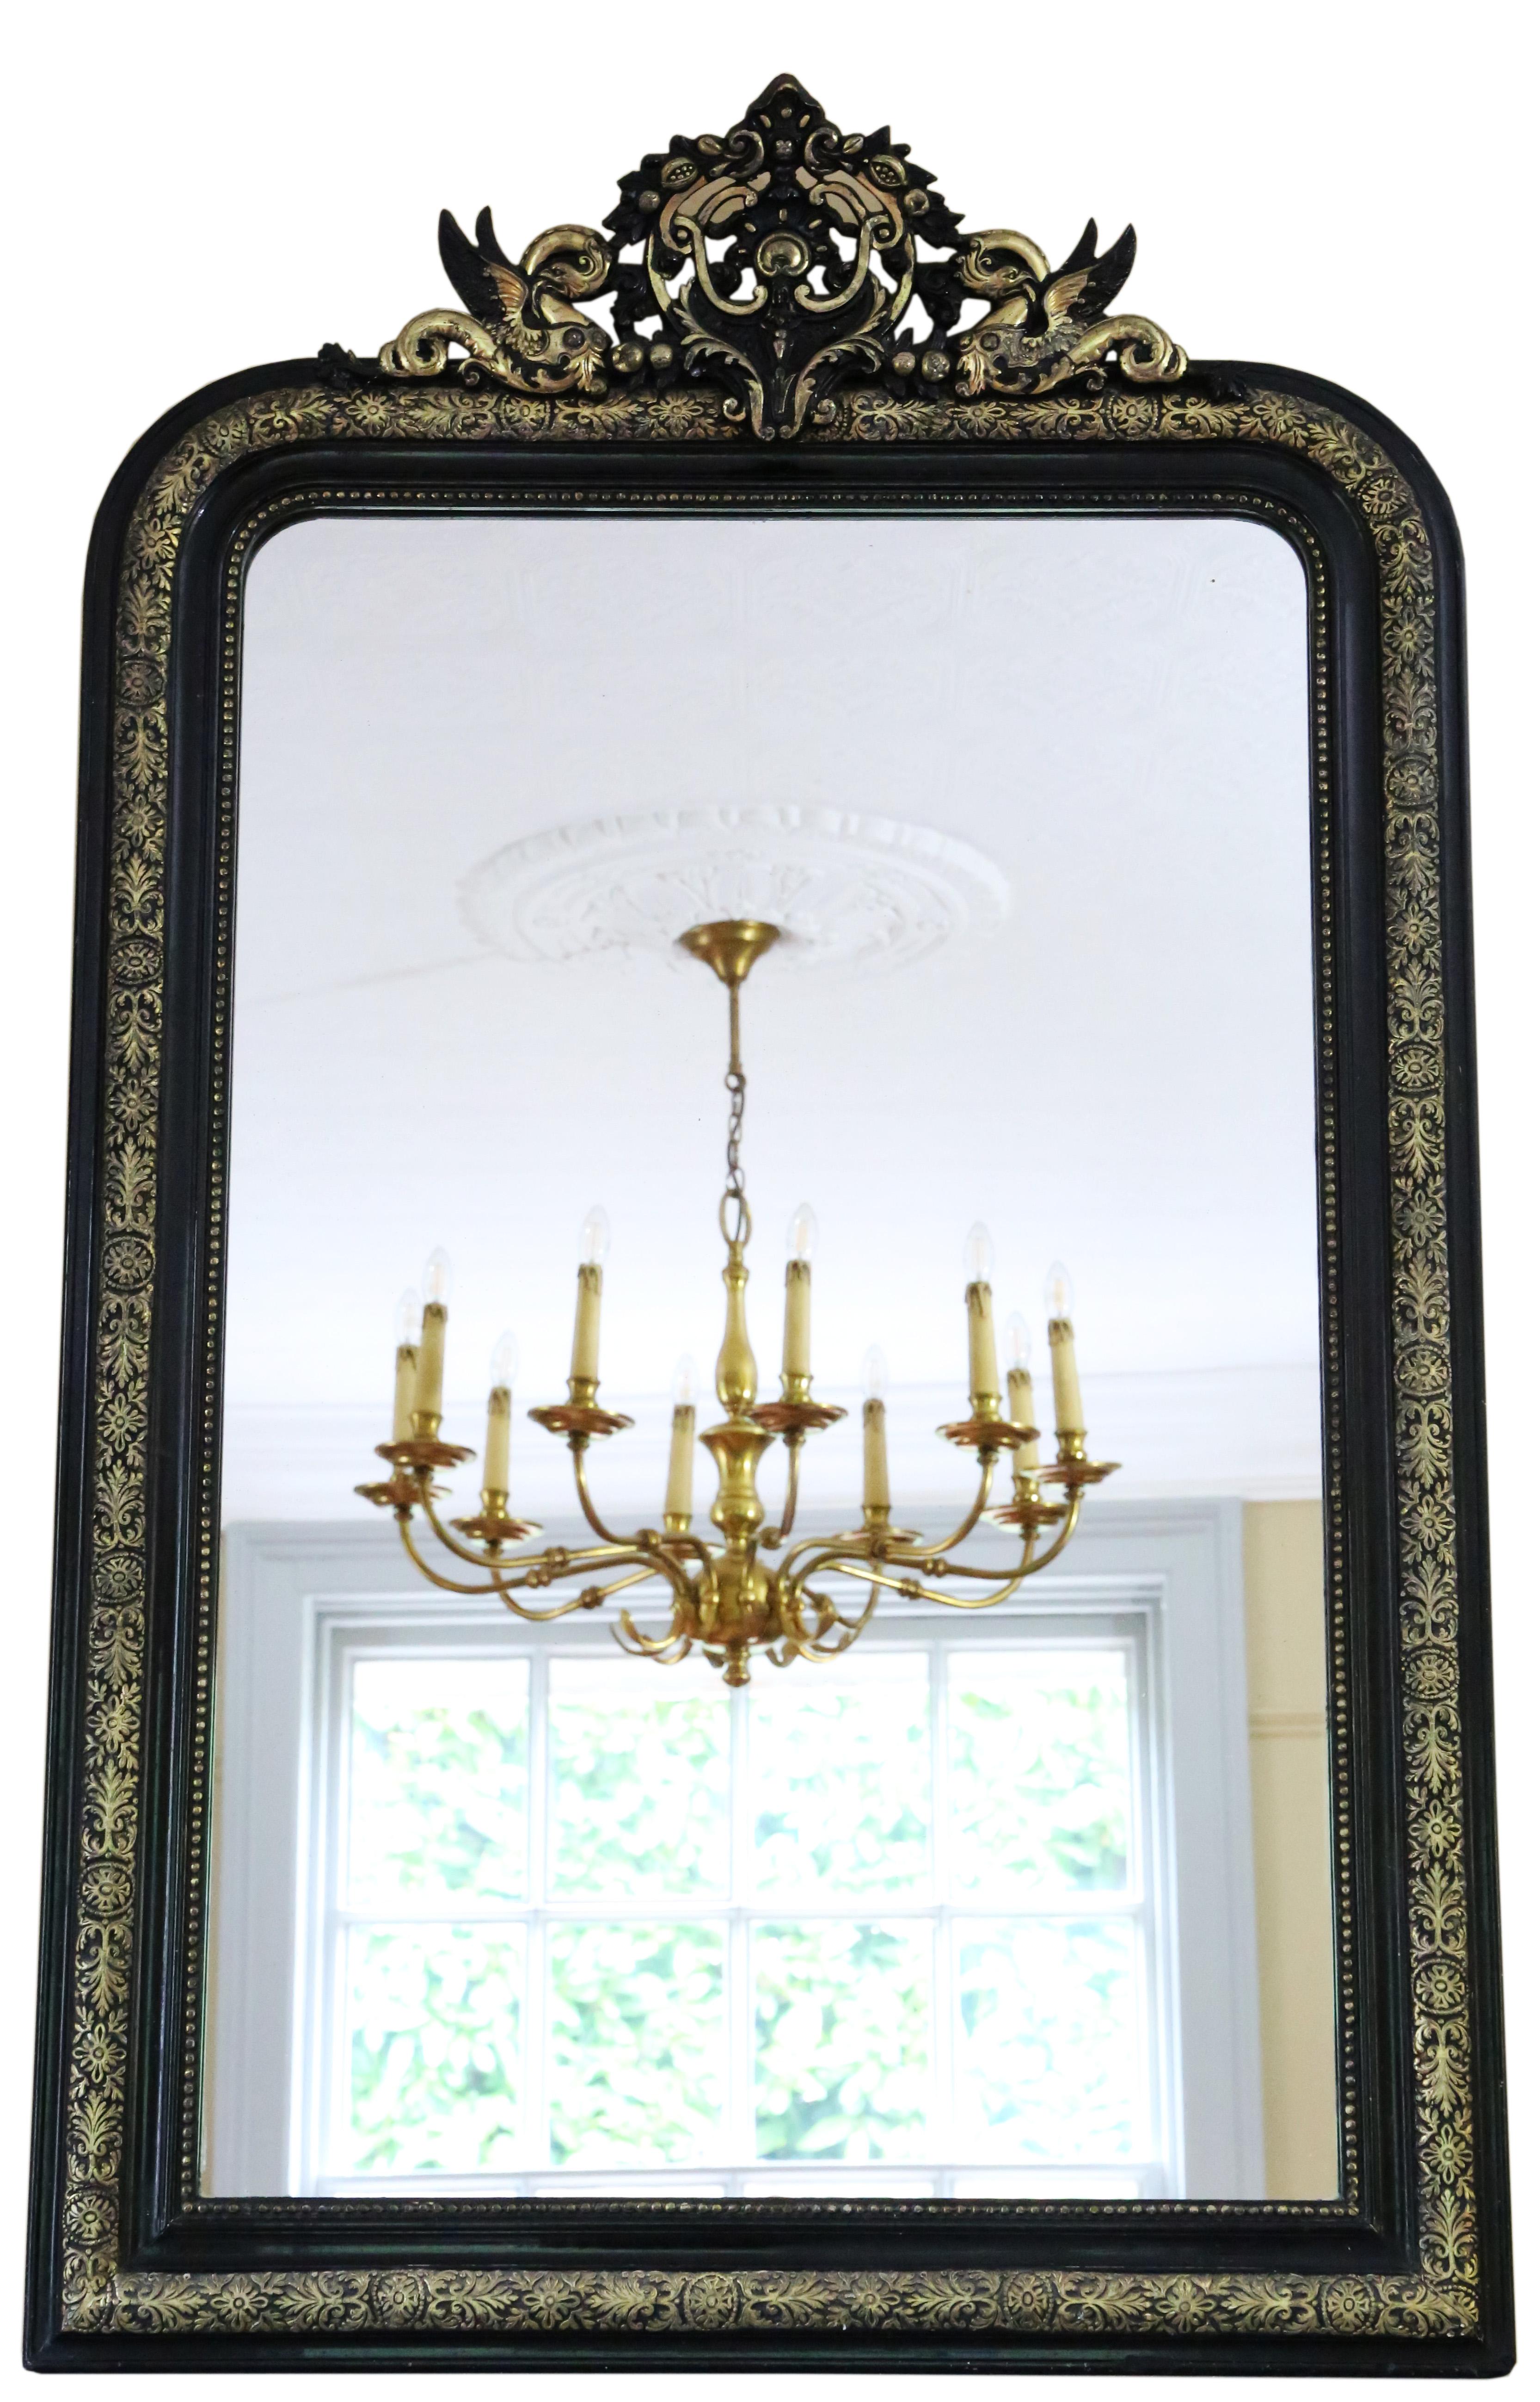 Magnificent and very large 19th Century ebonised and gilt overmantle wall mirror, showcasing exceptional quality and adorned with a charming dragon crest for added elegance.

This delightful and uncommon mirror stands out as a lovely and rare find,